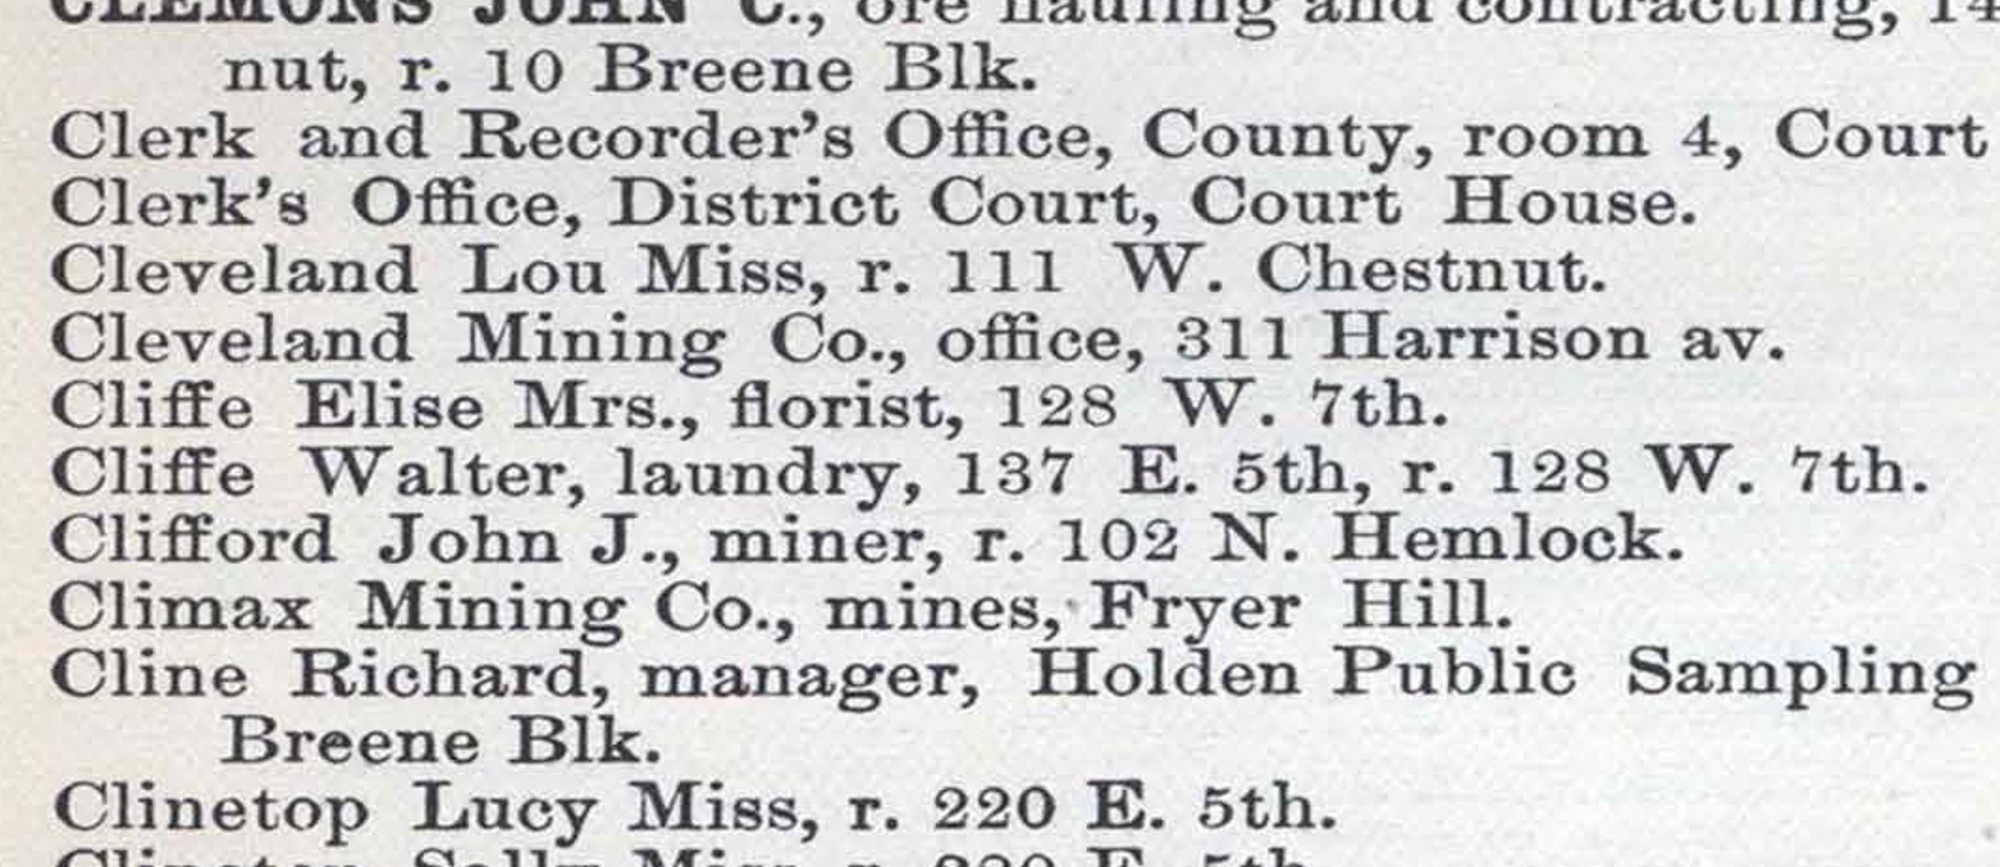 Dauth Family Archive - 1888 - Leadville Directory - Entry for Walter and Elisabeth Cliffe